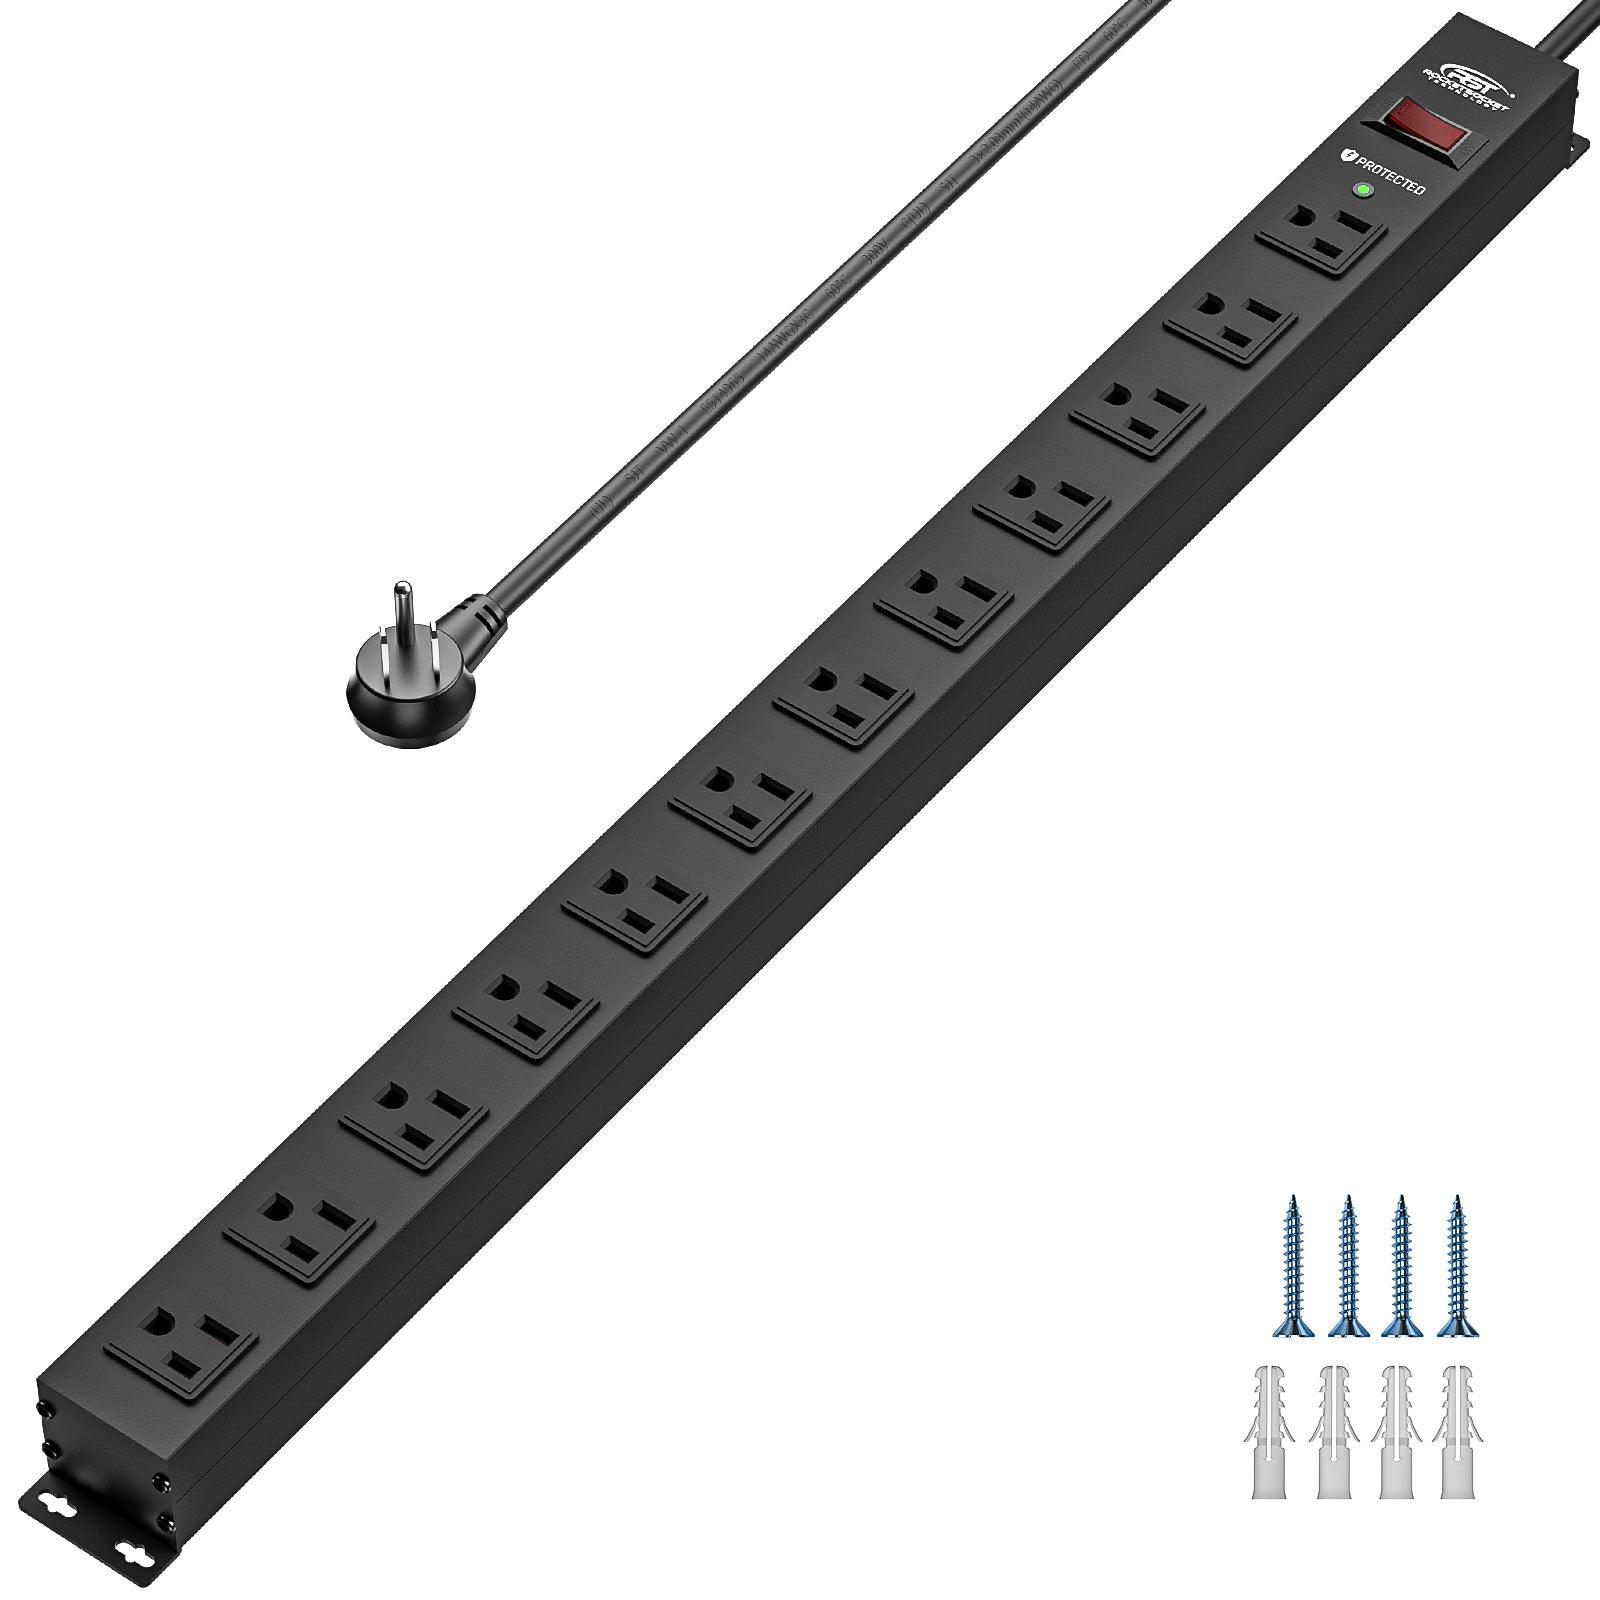 CRST 1.7" Space 12-Outlets Slim Surge Protector Power Strip, Optional 15FT/6FT Flat Plug Power Cord, Mounting Kits Included - Rocket Socket Technology